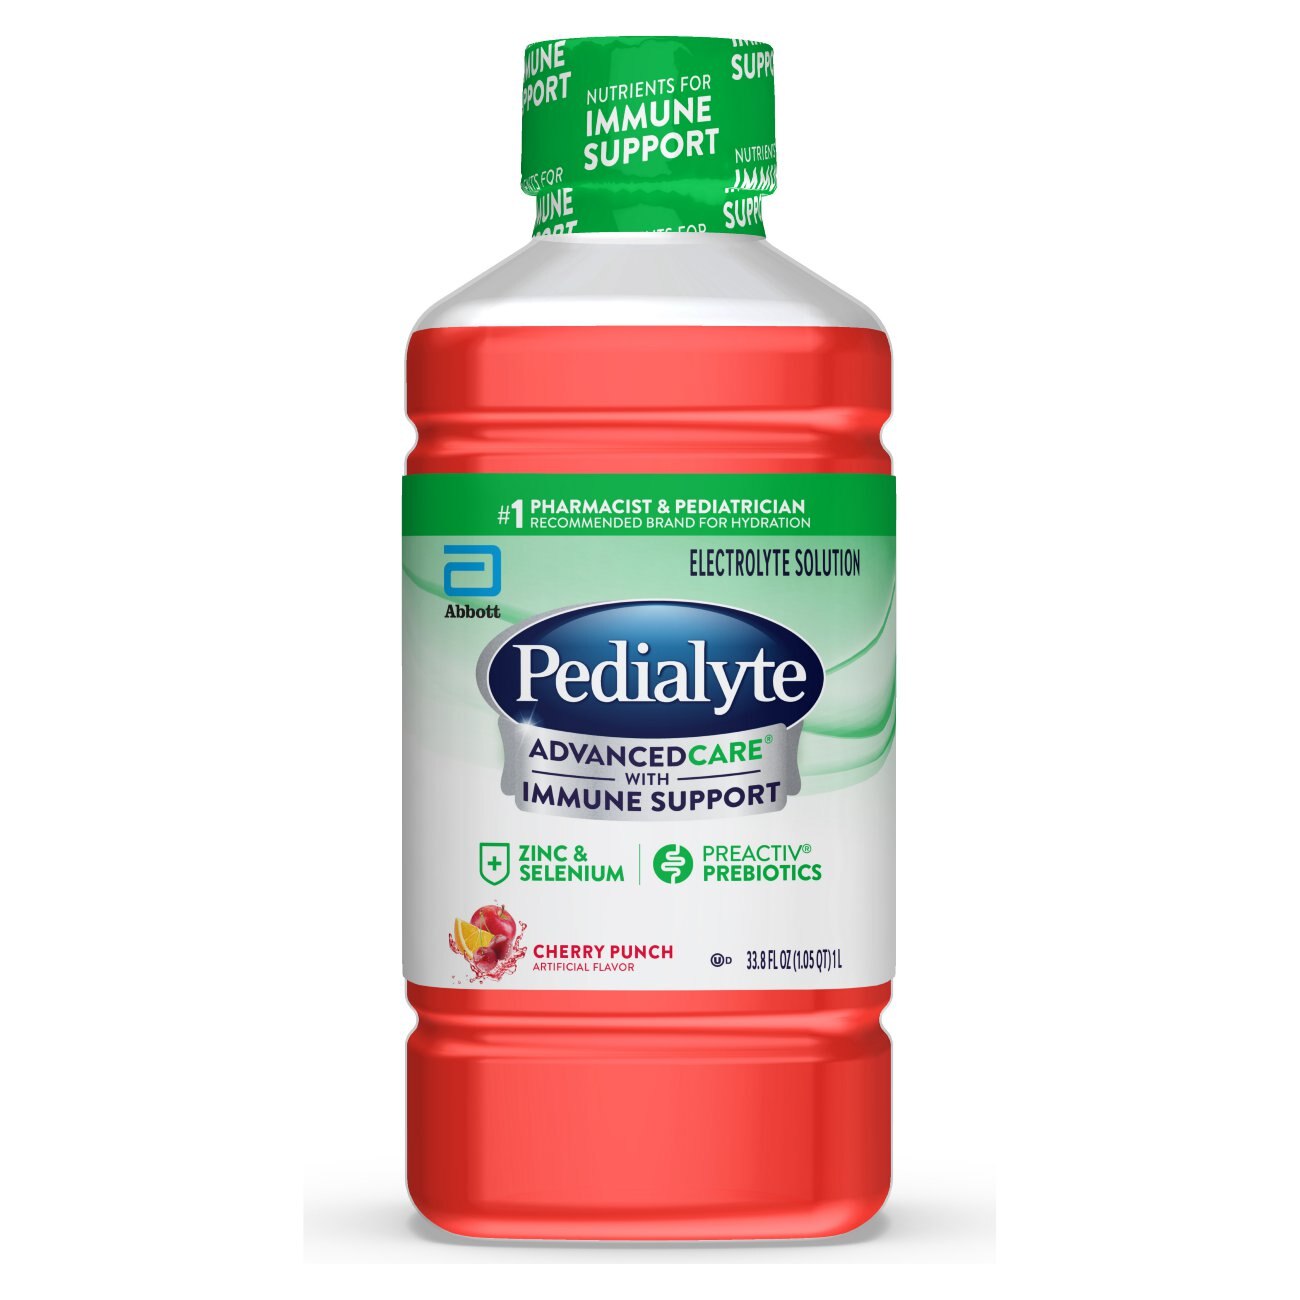 Pedialyte AdvancedCare Electrolyte Solution Ready-to-Drink 1.1 qt, 1CT